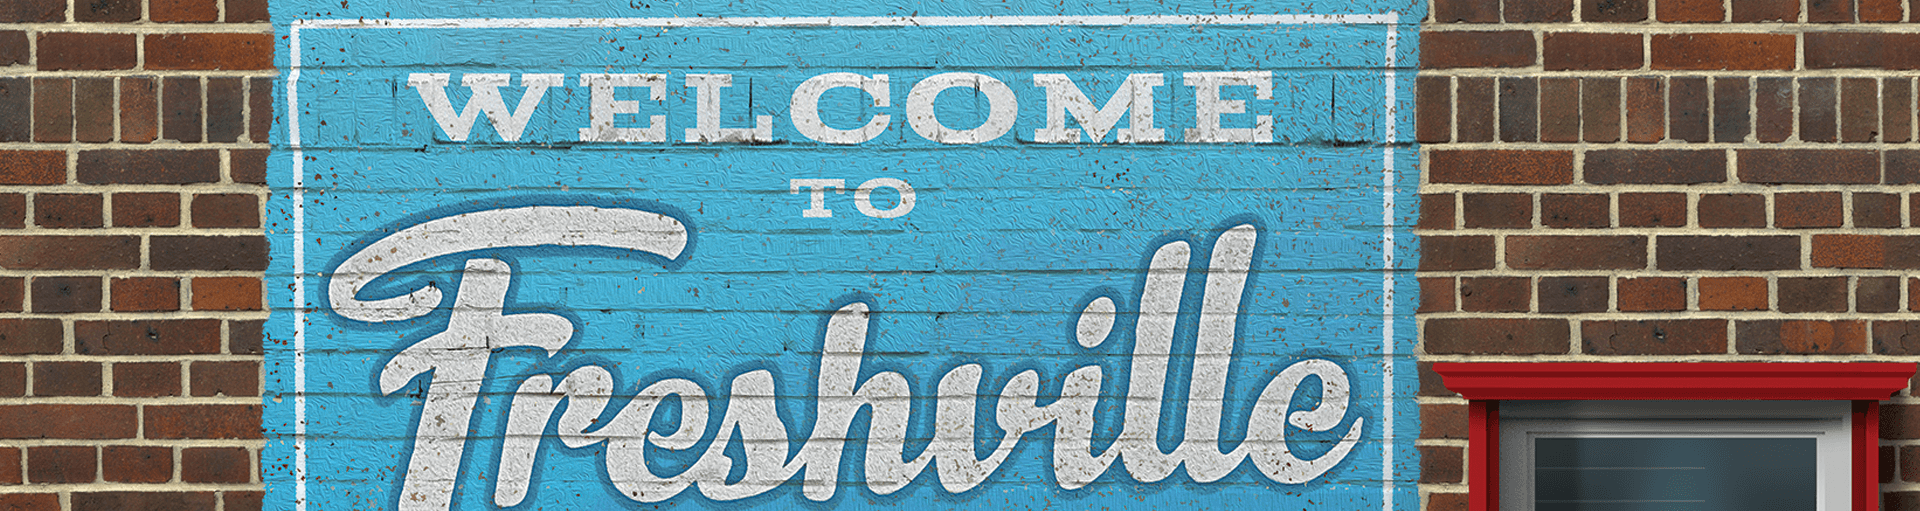 Welcome to Freshville, Fresh-Lock's PACK EXPO 2018 Tradeshow Booth